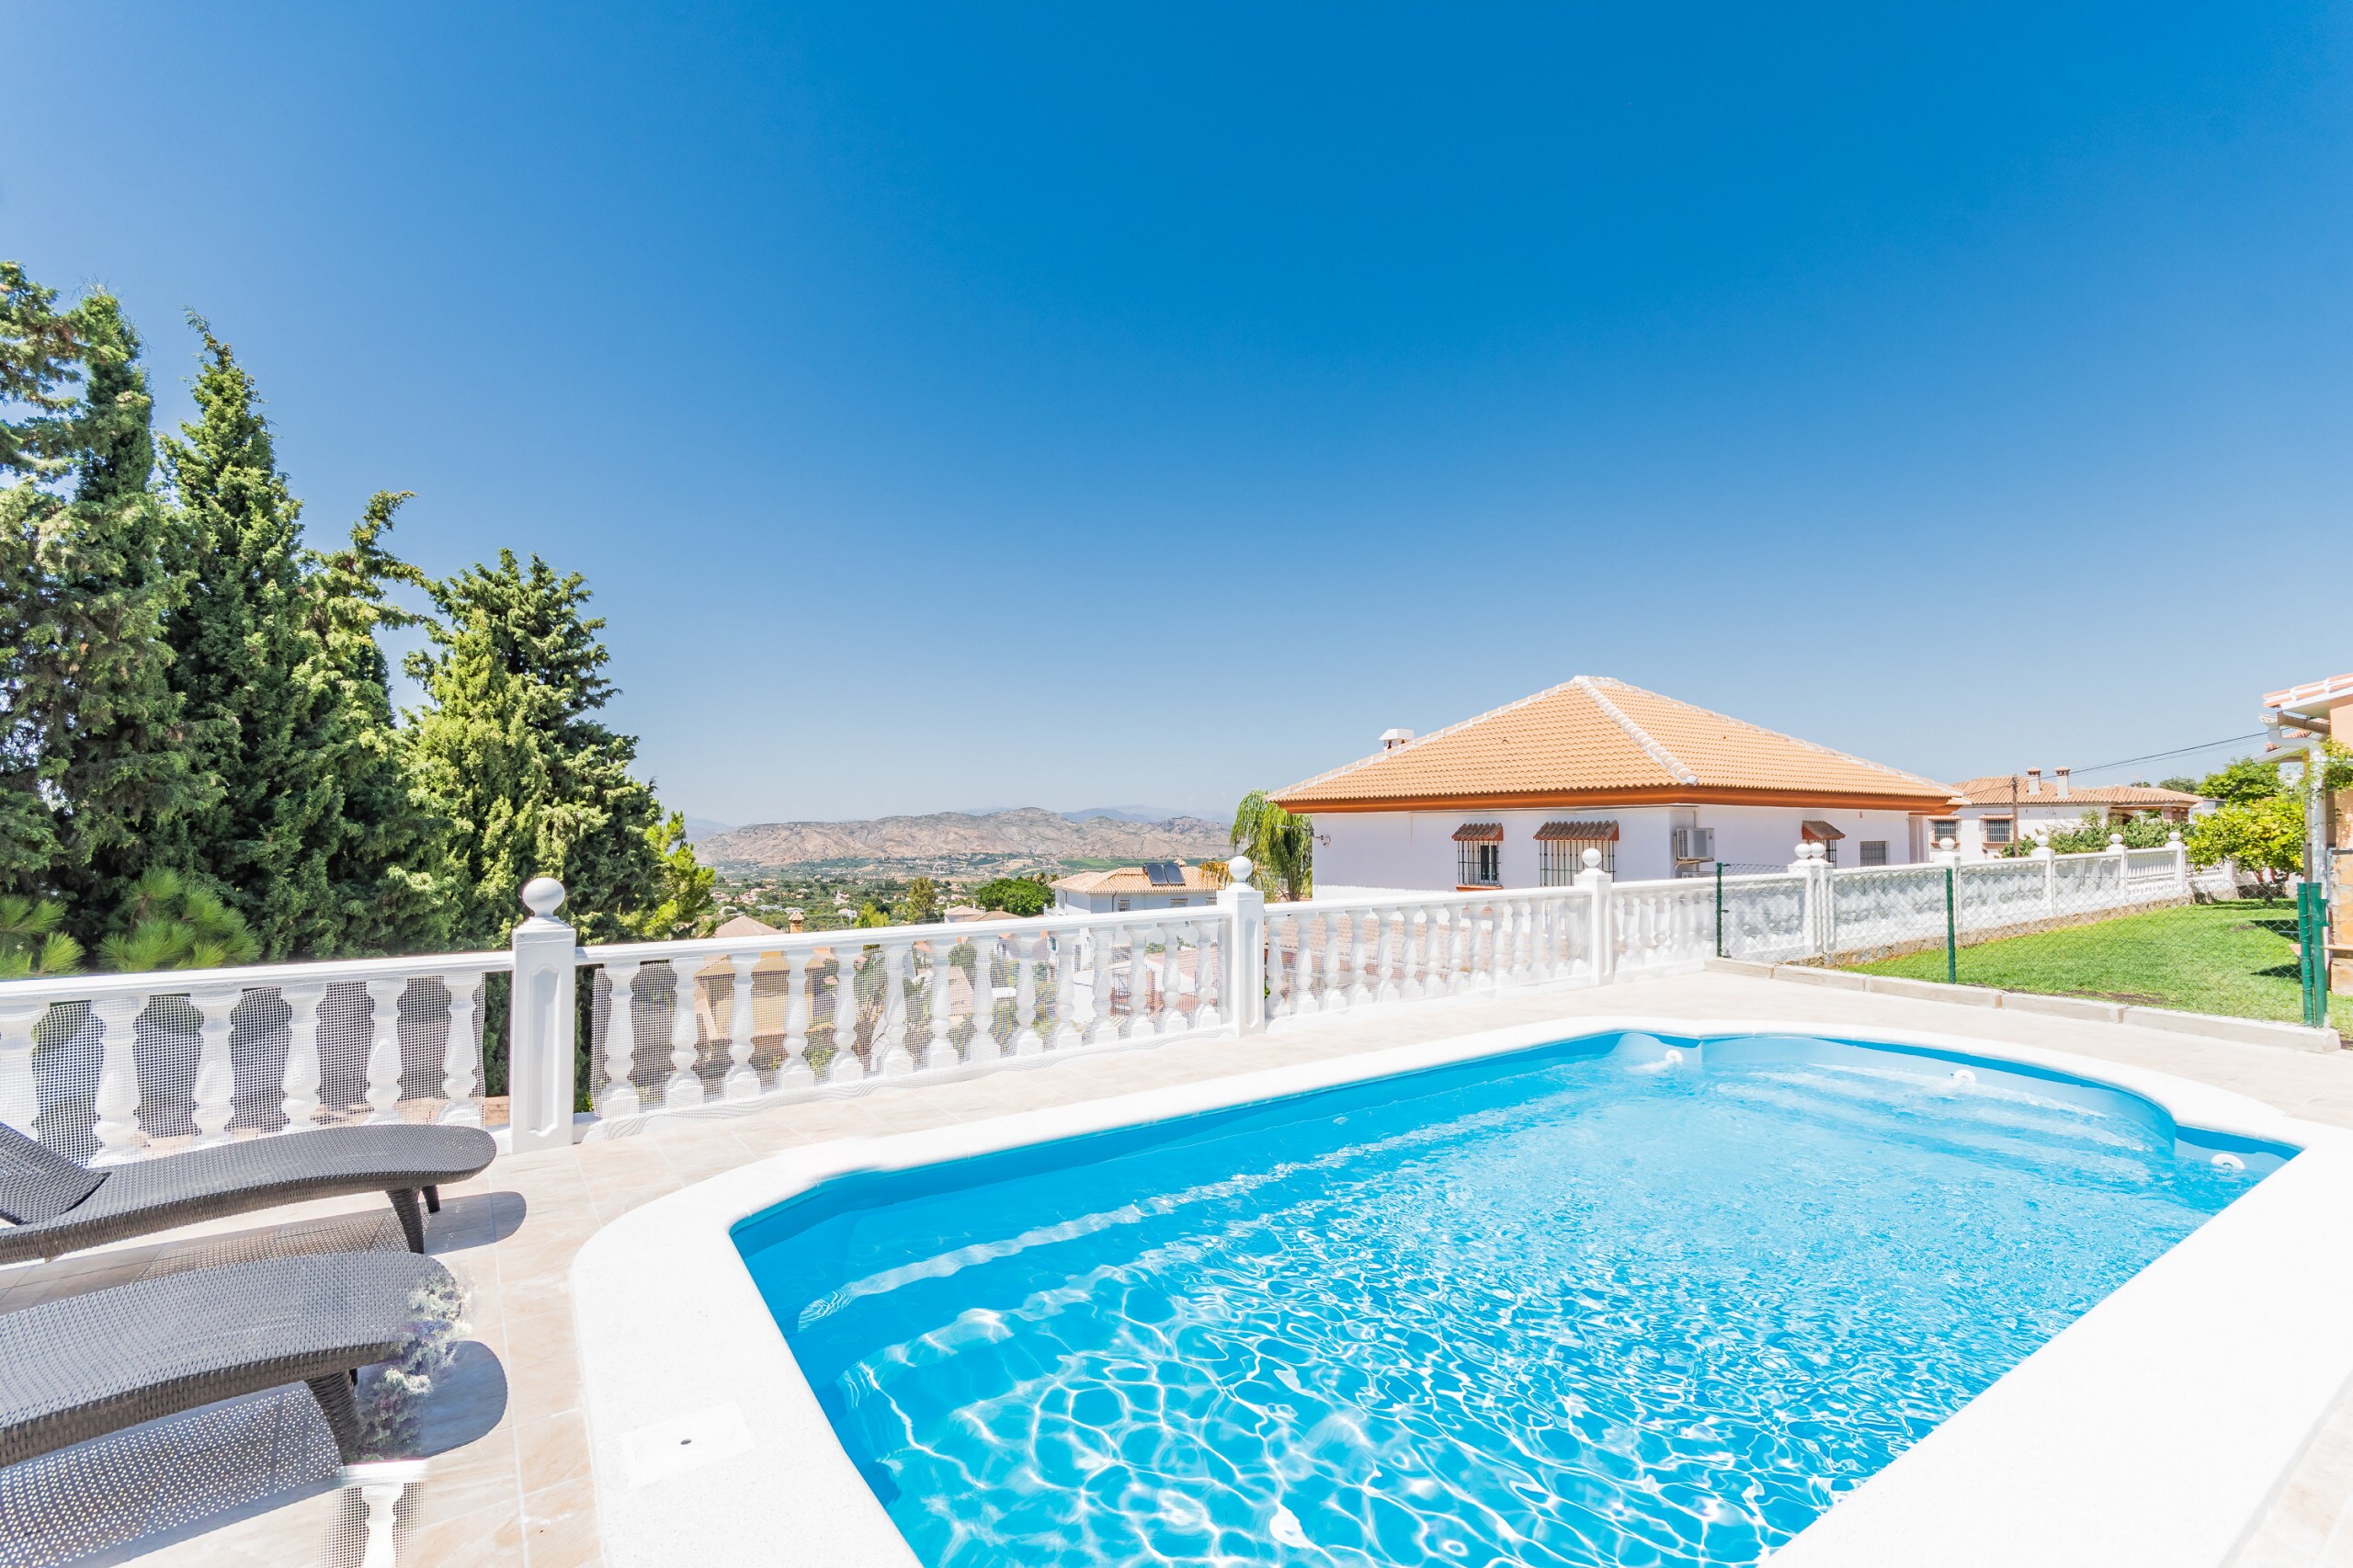 Enjoy the pool of this country house in Alhaurín el Grande